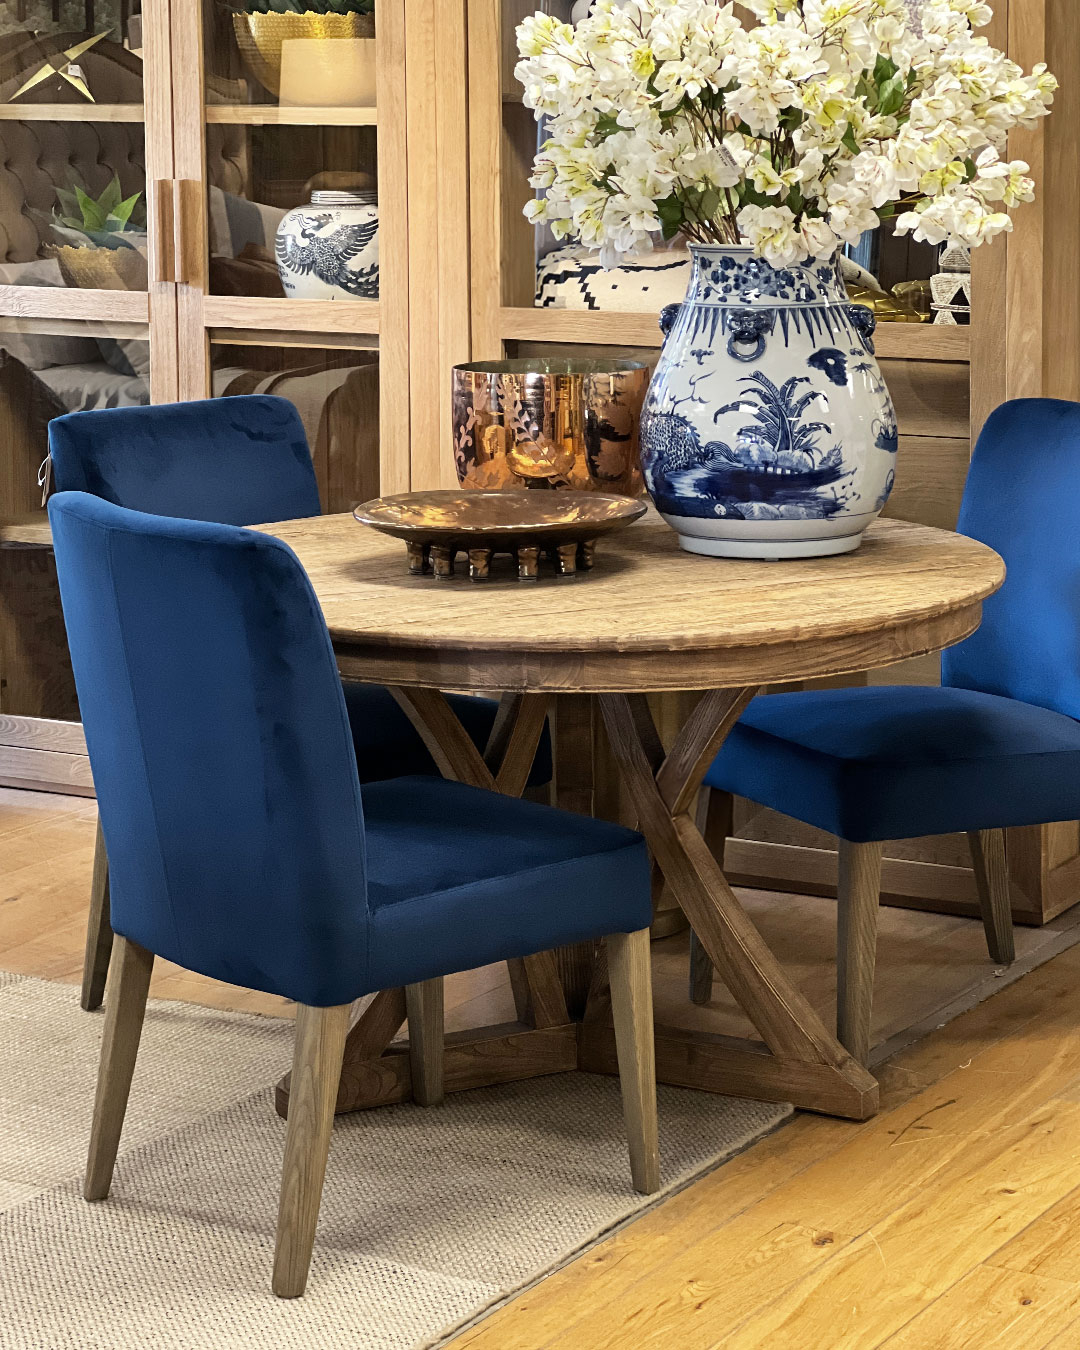 Block and chisel dining chair upholstered in royal blue